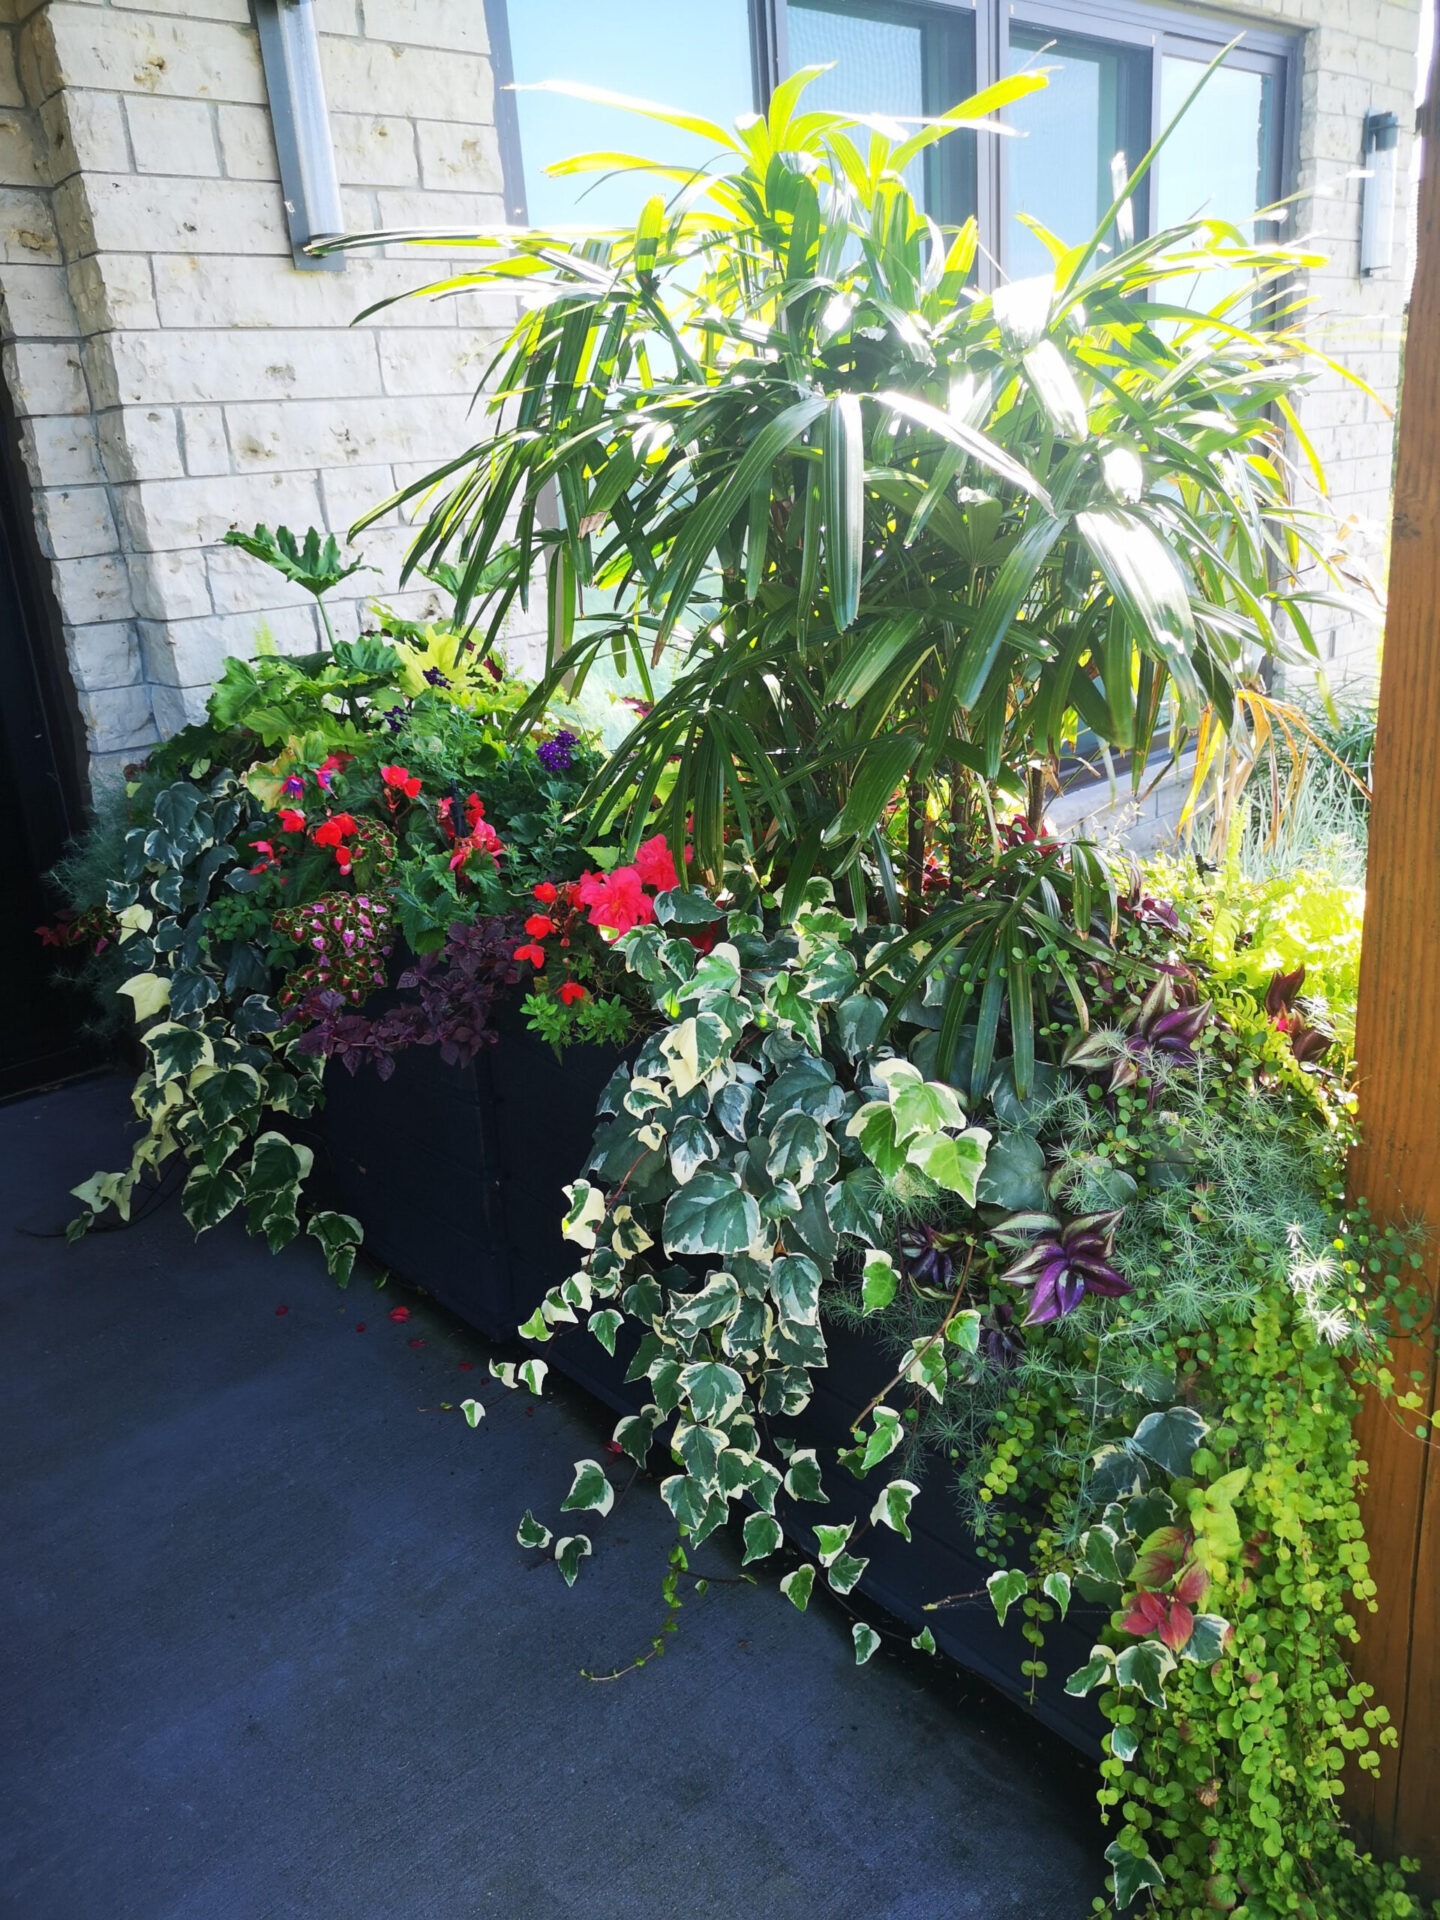 A lush planter with a variety of plants including red flowers and greenery outside a building with a brick facade on a sunny day.